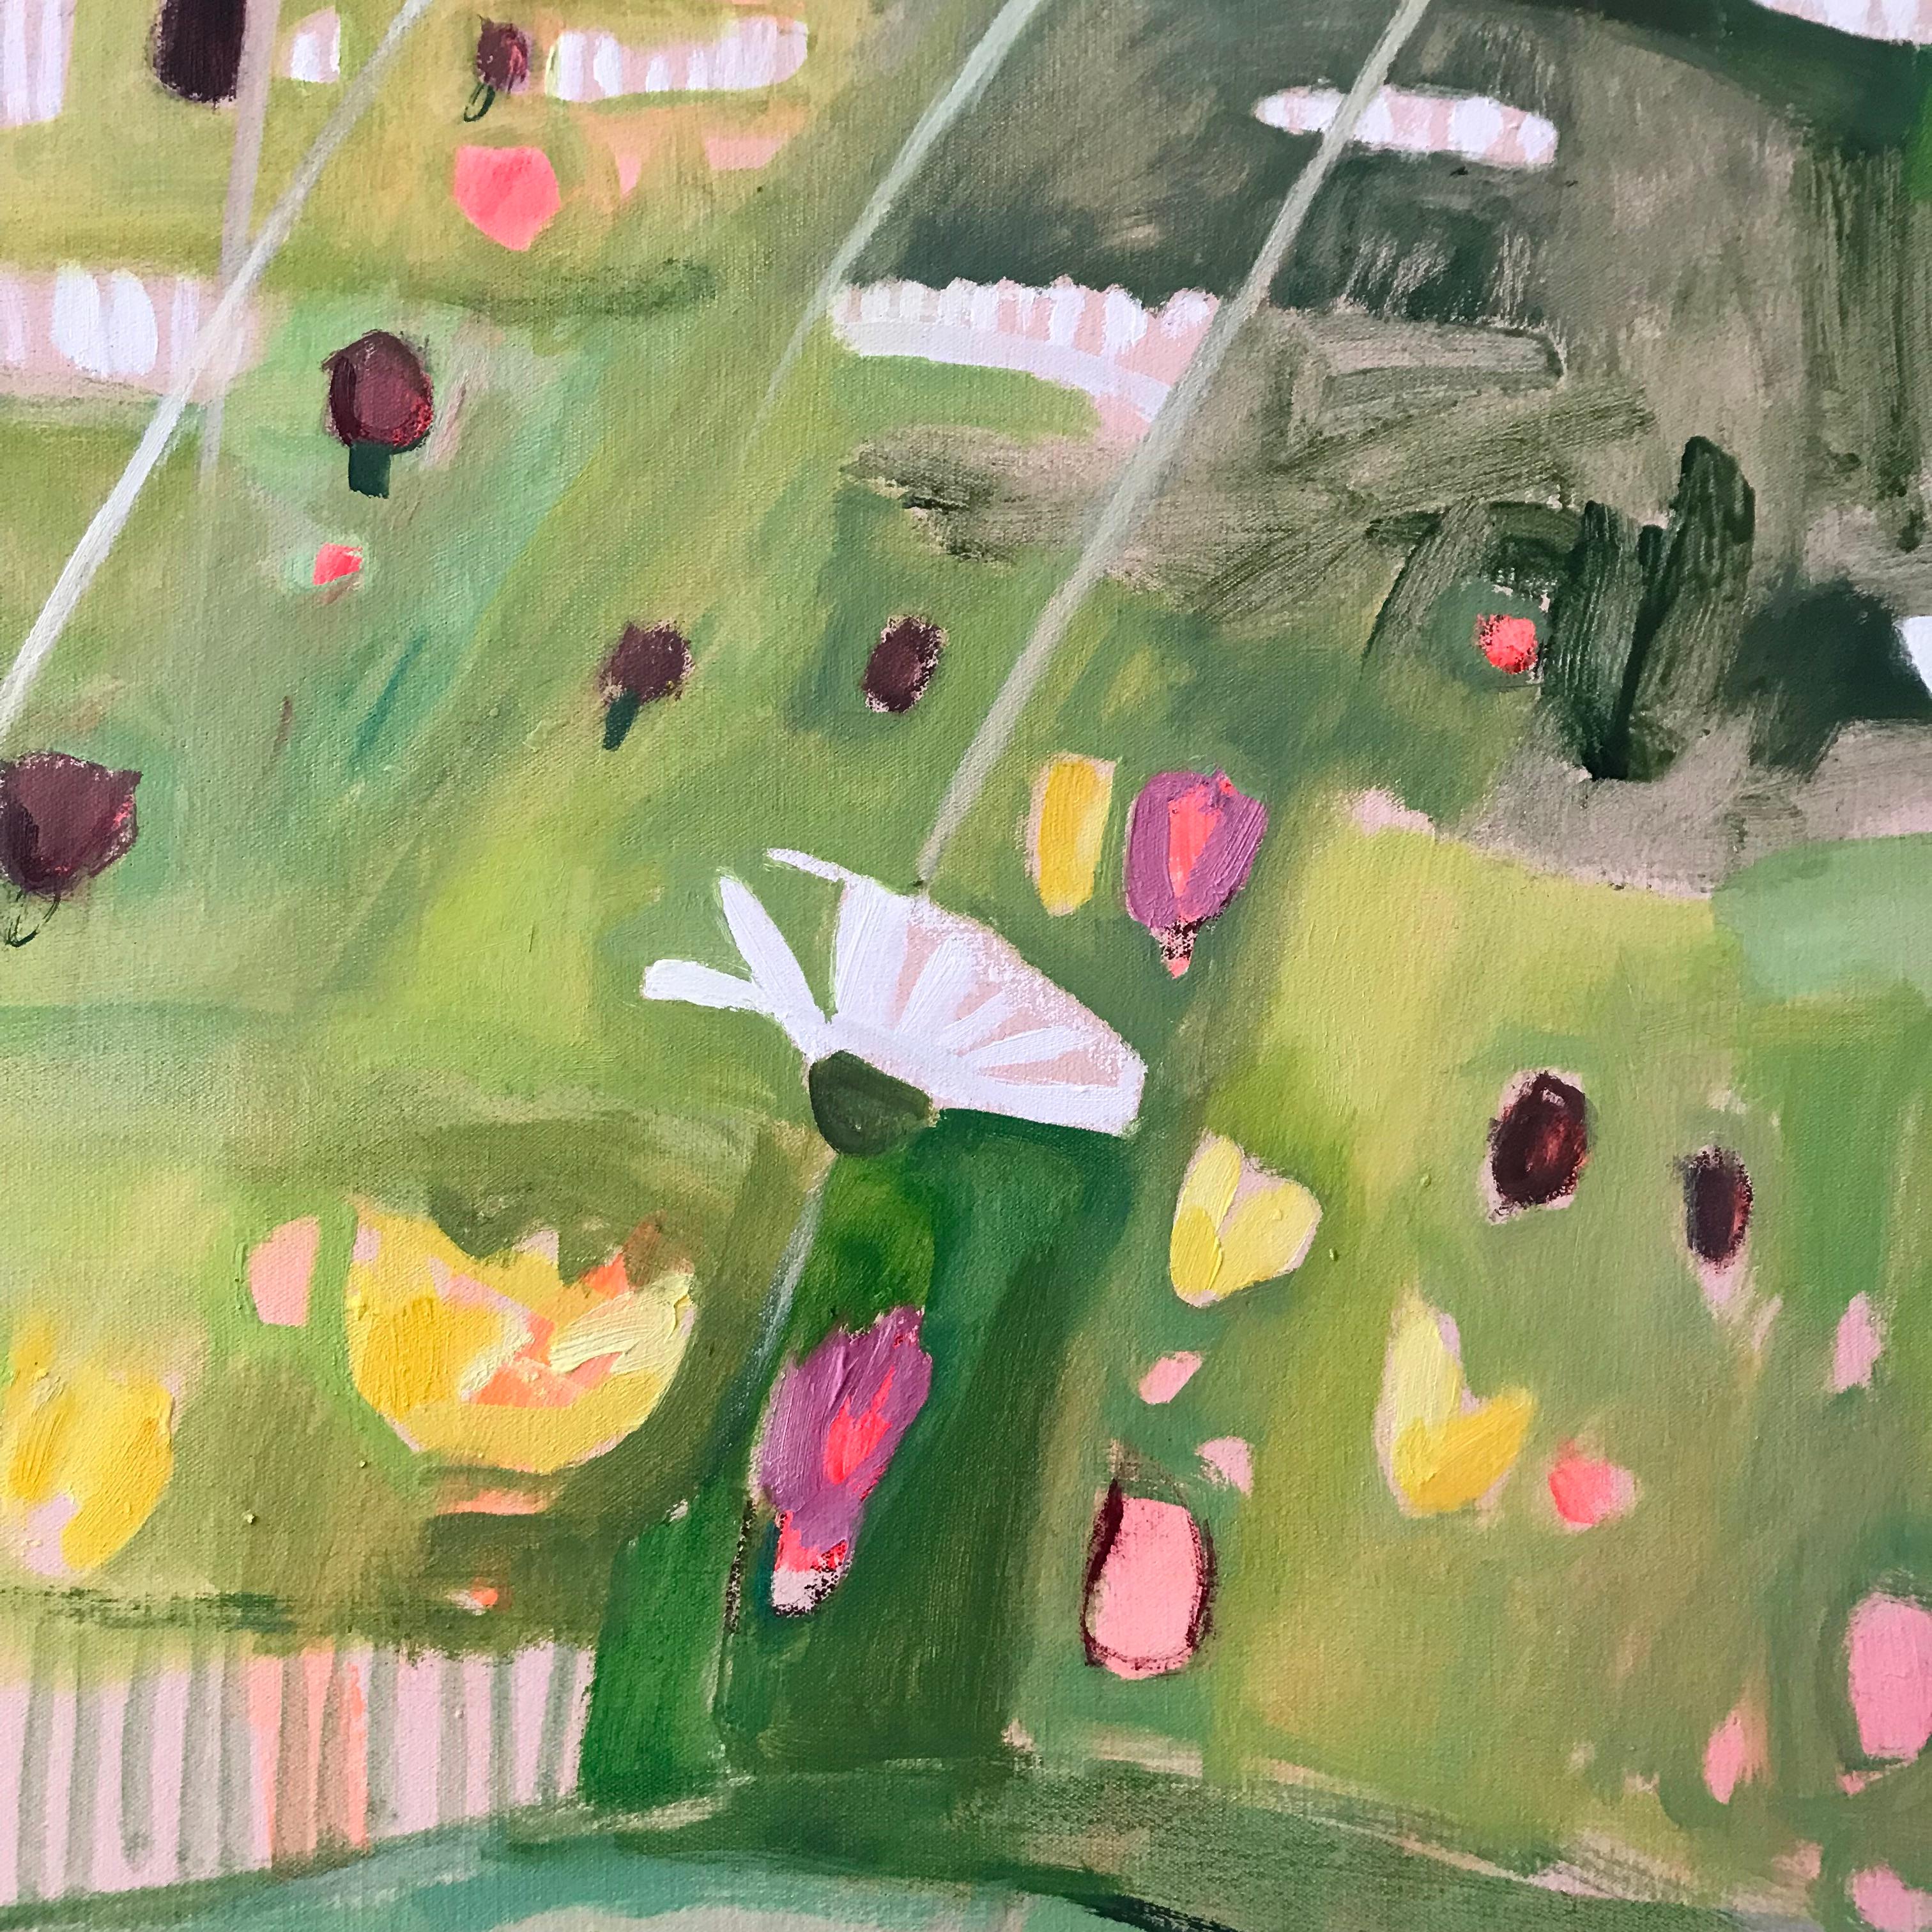 This work, painted in delicate summery pastel shades depicts a traditional wildflower meadow putting on its full summer show. Here are the colours of soft green grasses and the pretty pinks and yellows of the native wild flowers in this meadow.